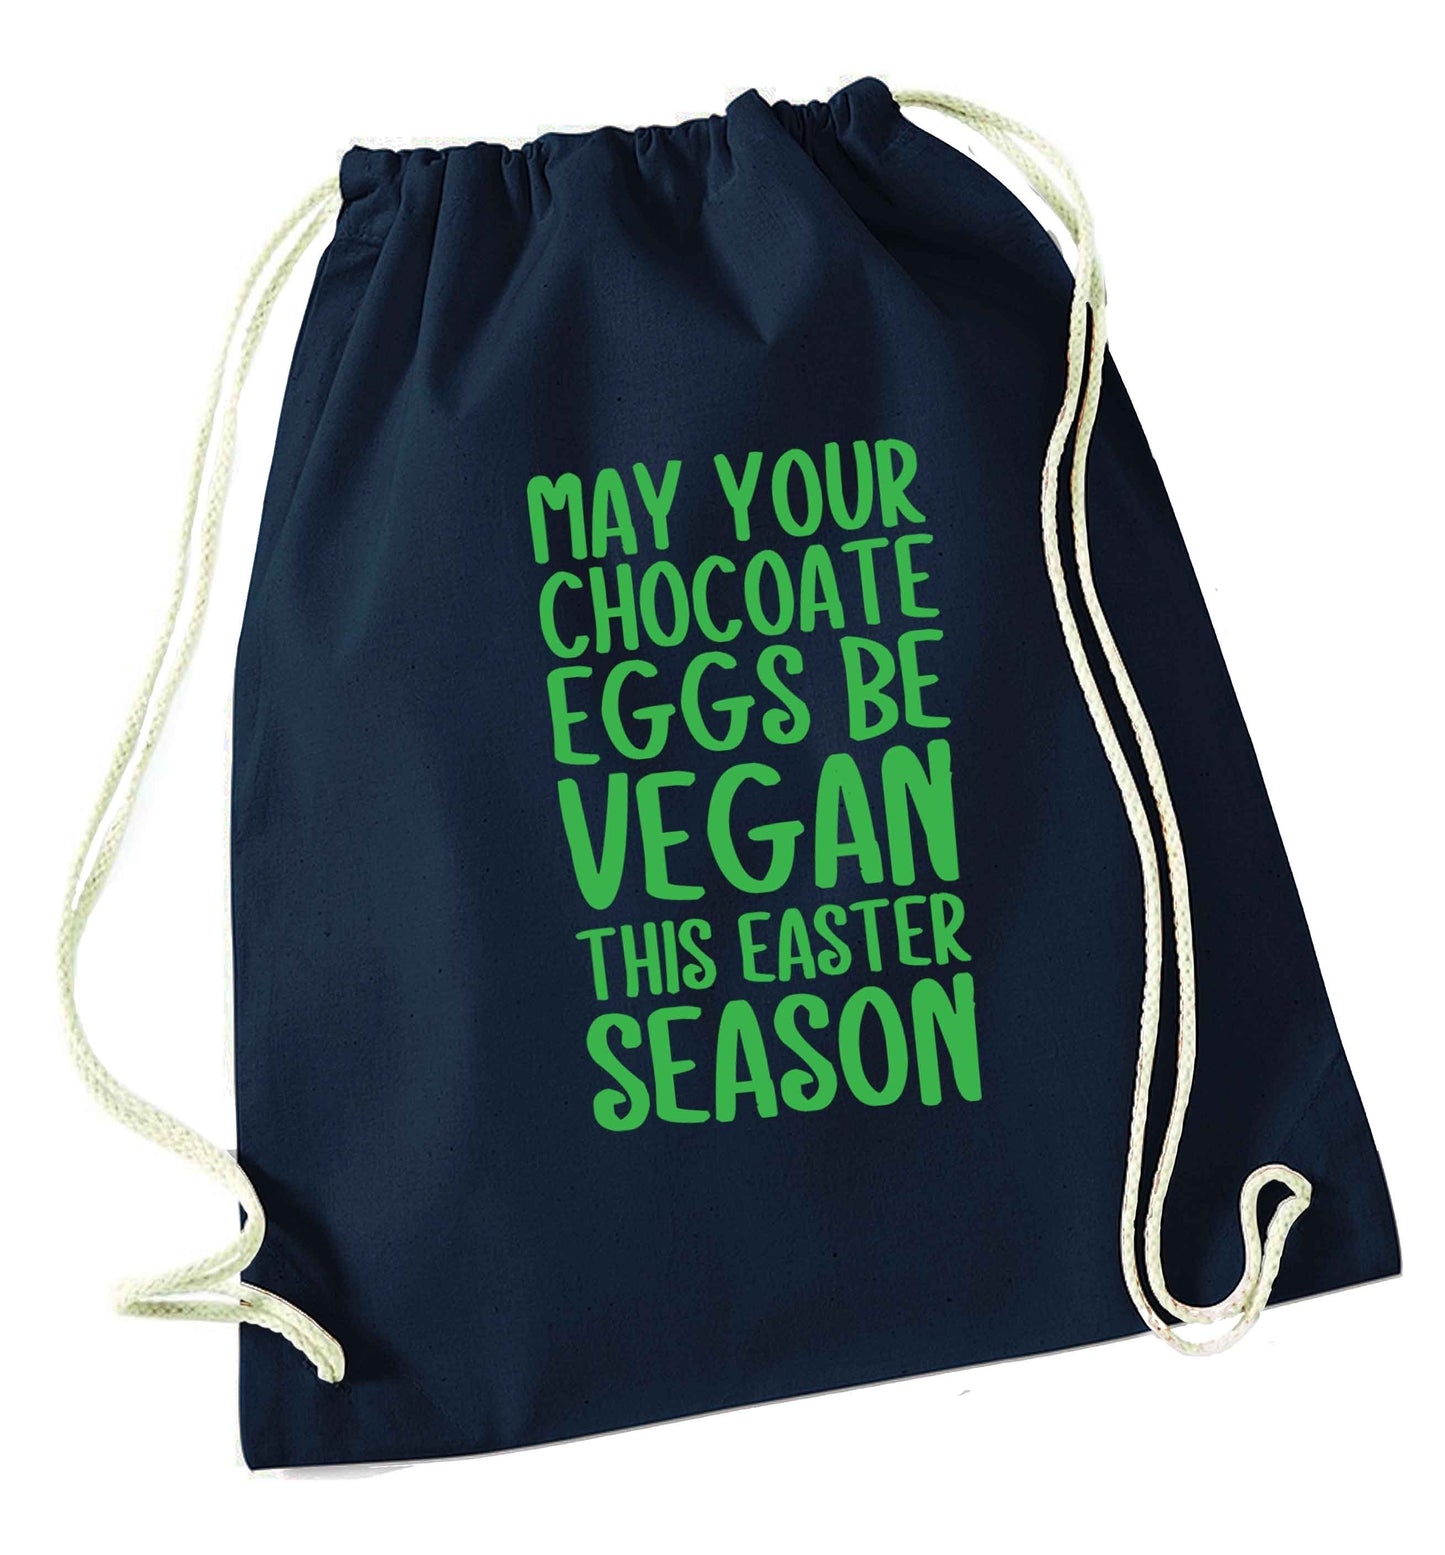 Easter bunny approved! Vegans will love this easter themed navy drawstring bag